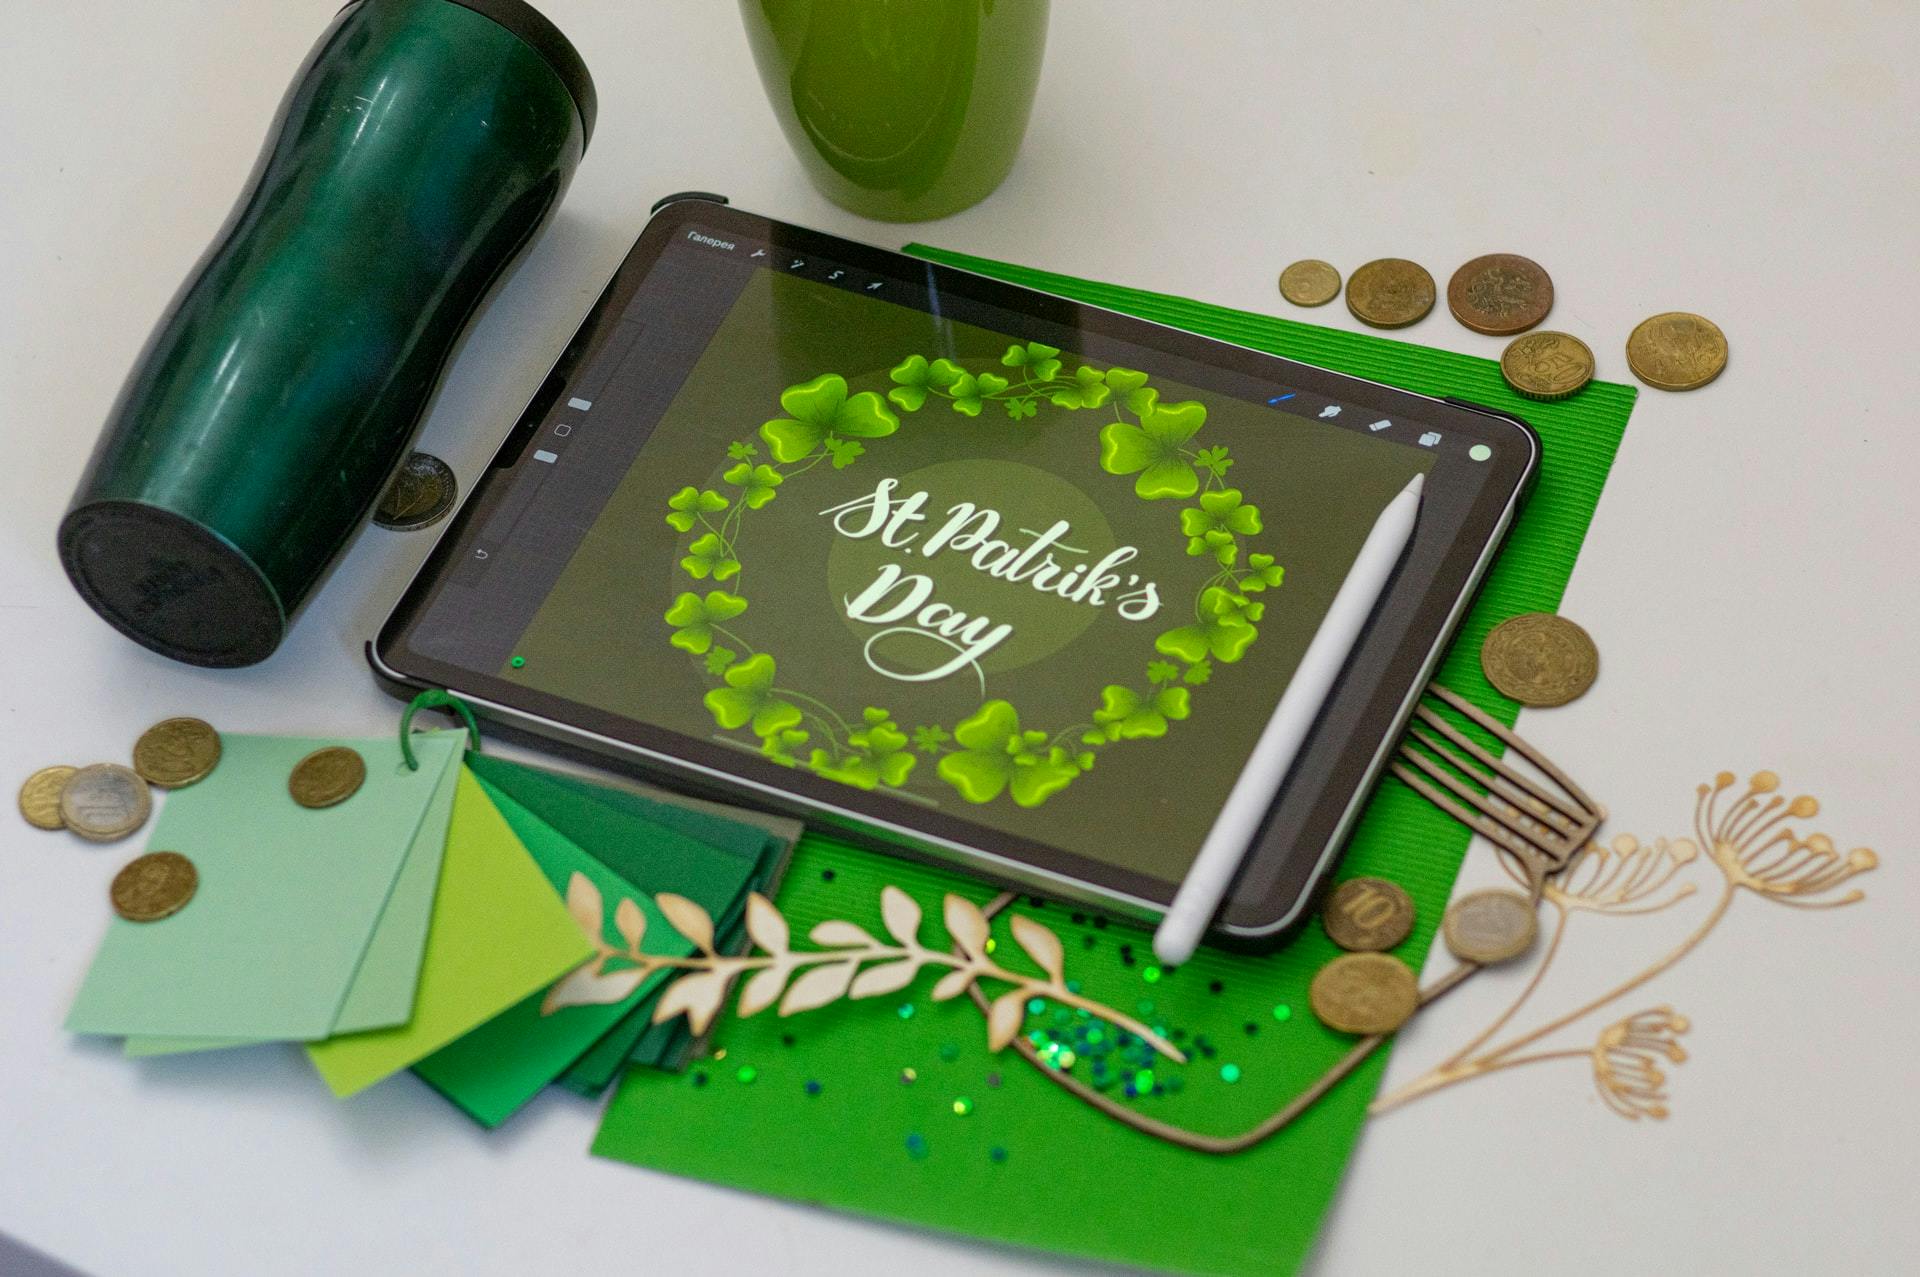 St. Patrick's Day Marketing Ideas For Your Business in 2023